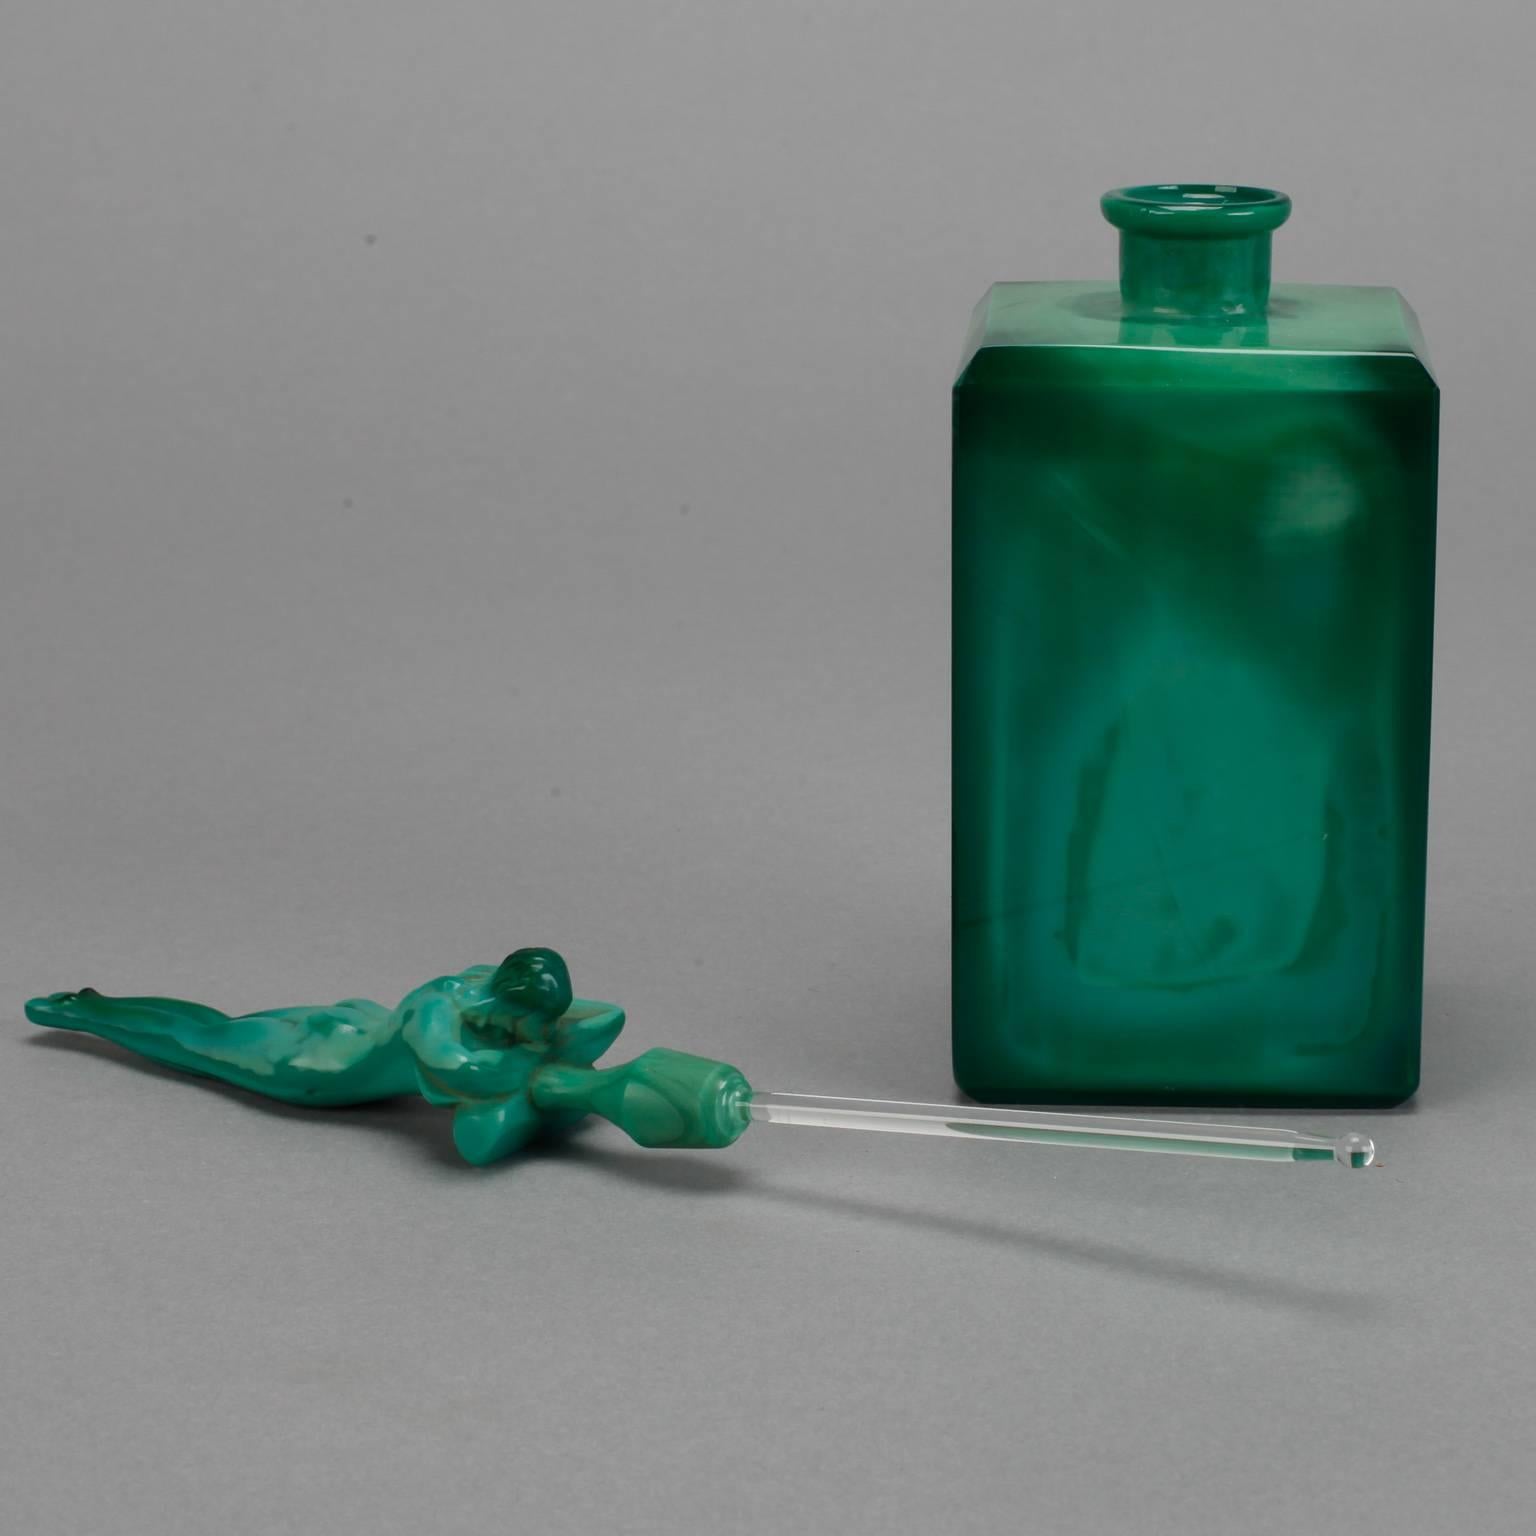 Sought after circa 1930s Czech heavy malachite glass perfume in rectangular form with beautifully detailed nude female figure on stopper.